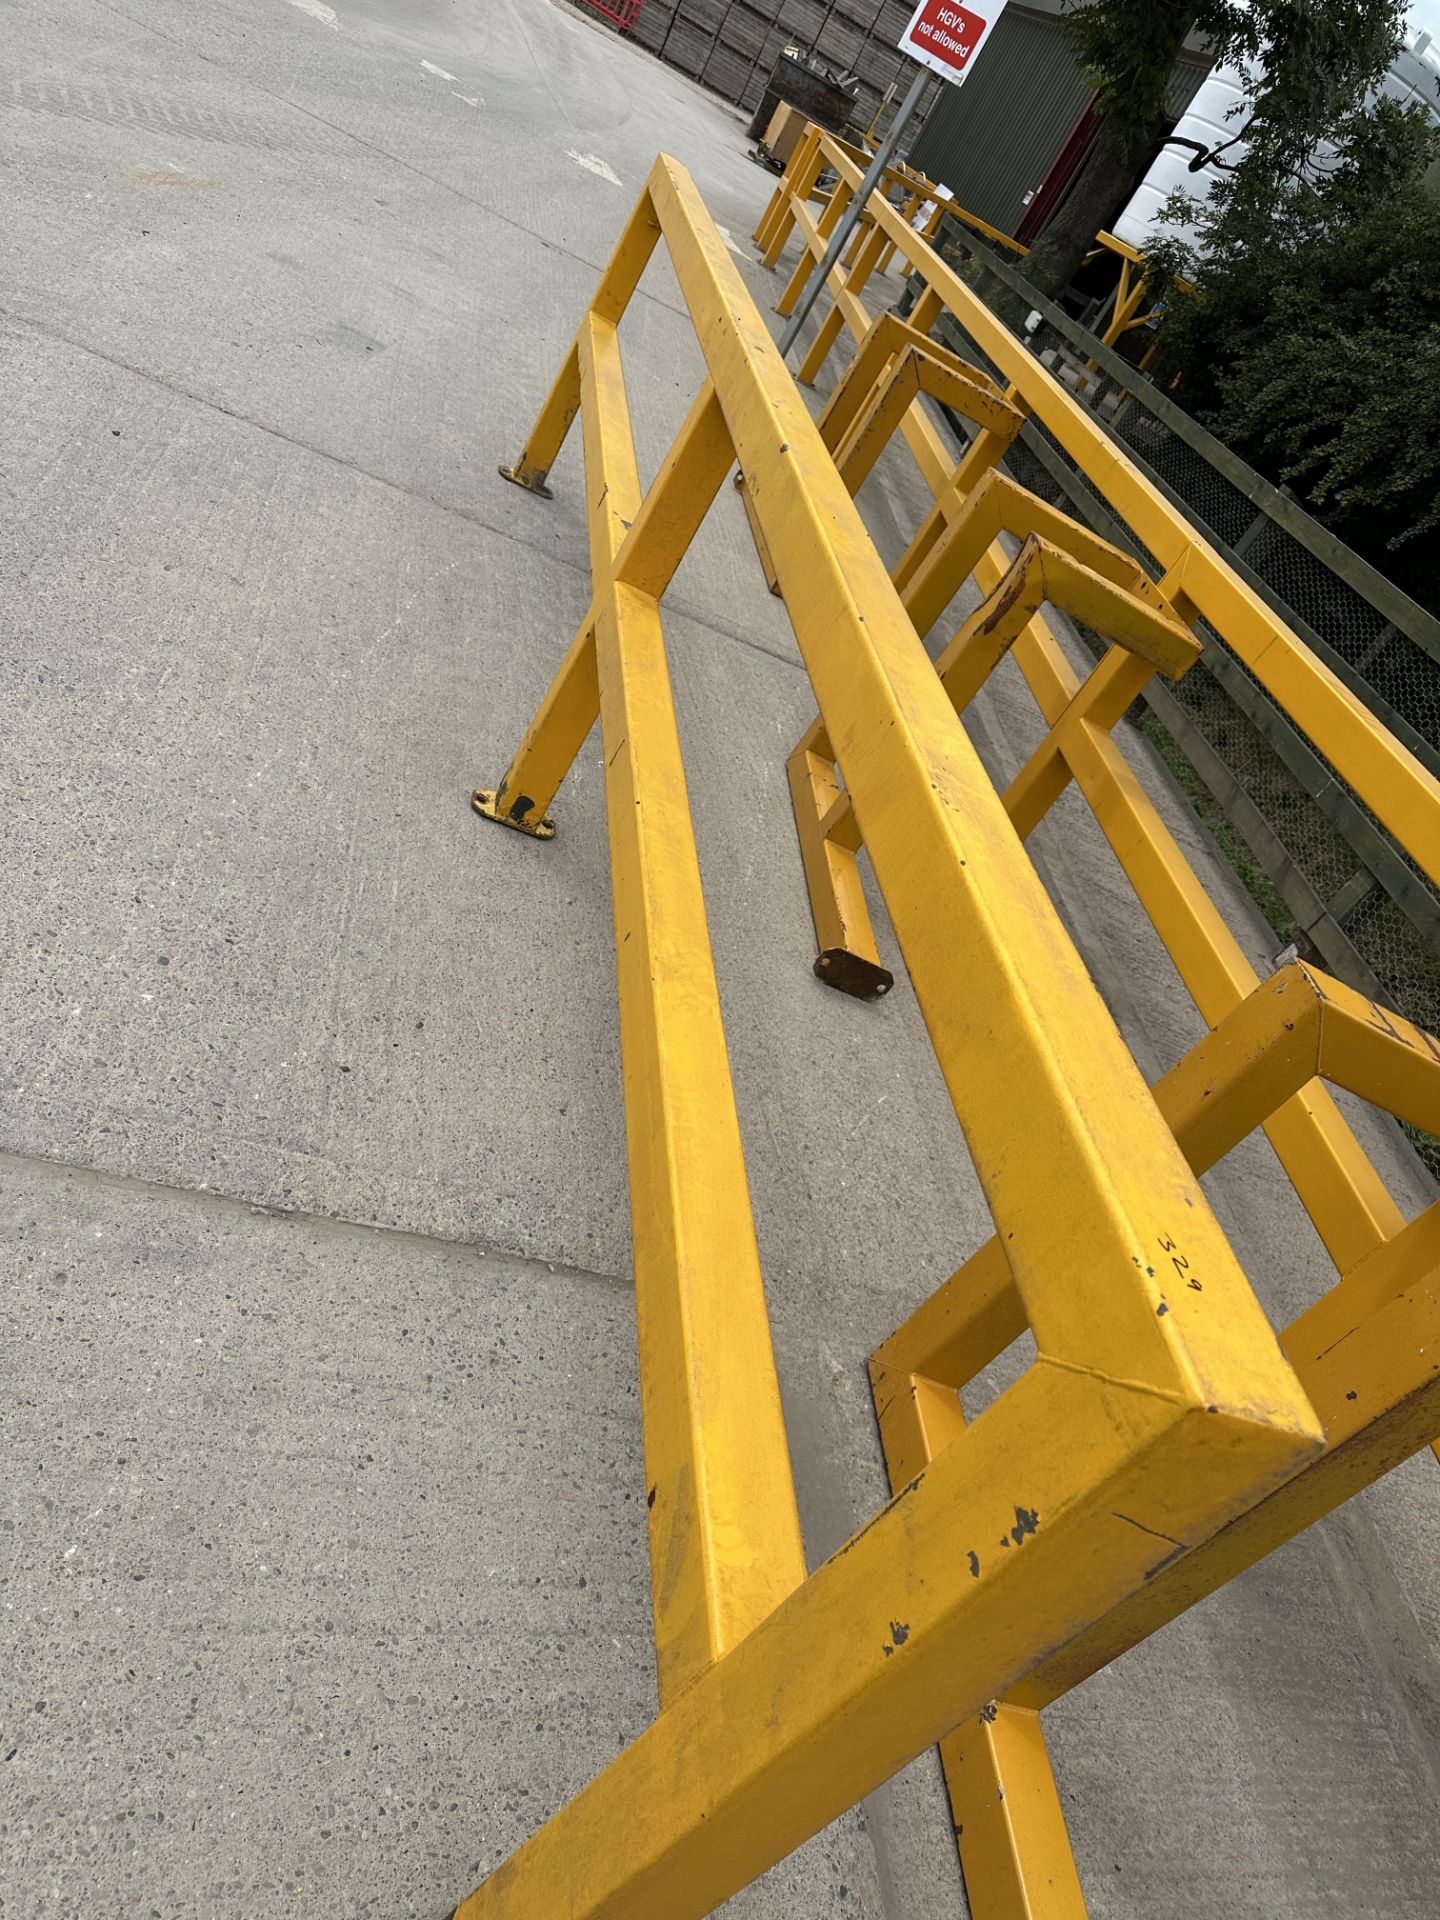 VARIOUS YELLOW BARRIERS.